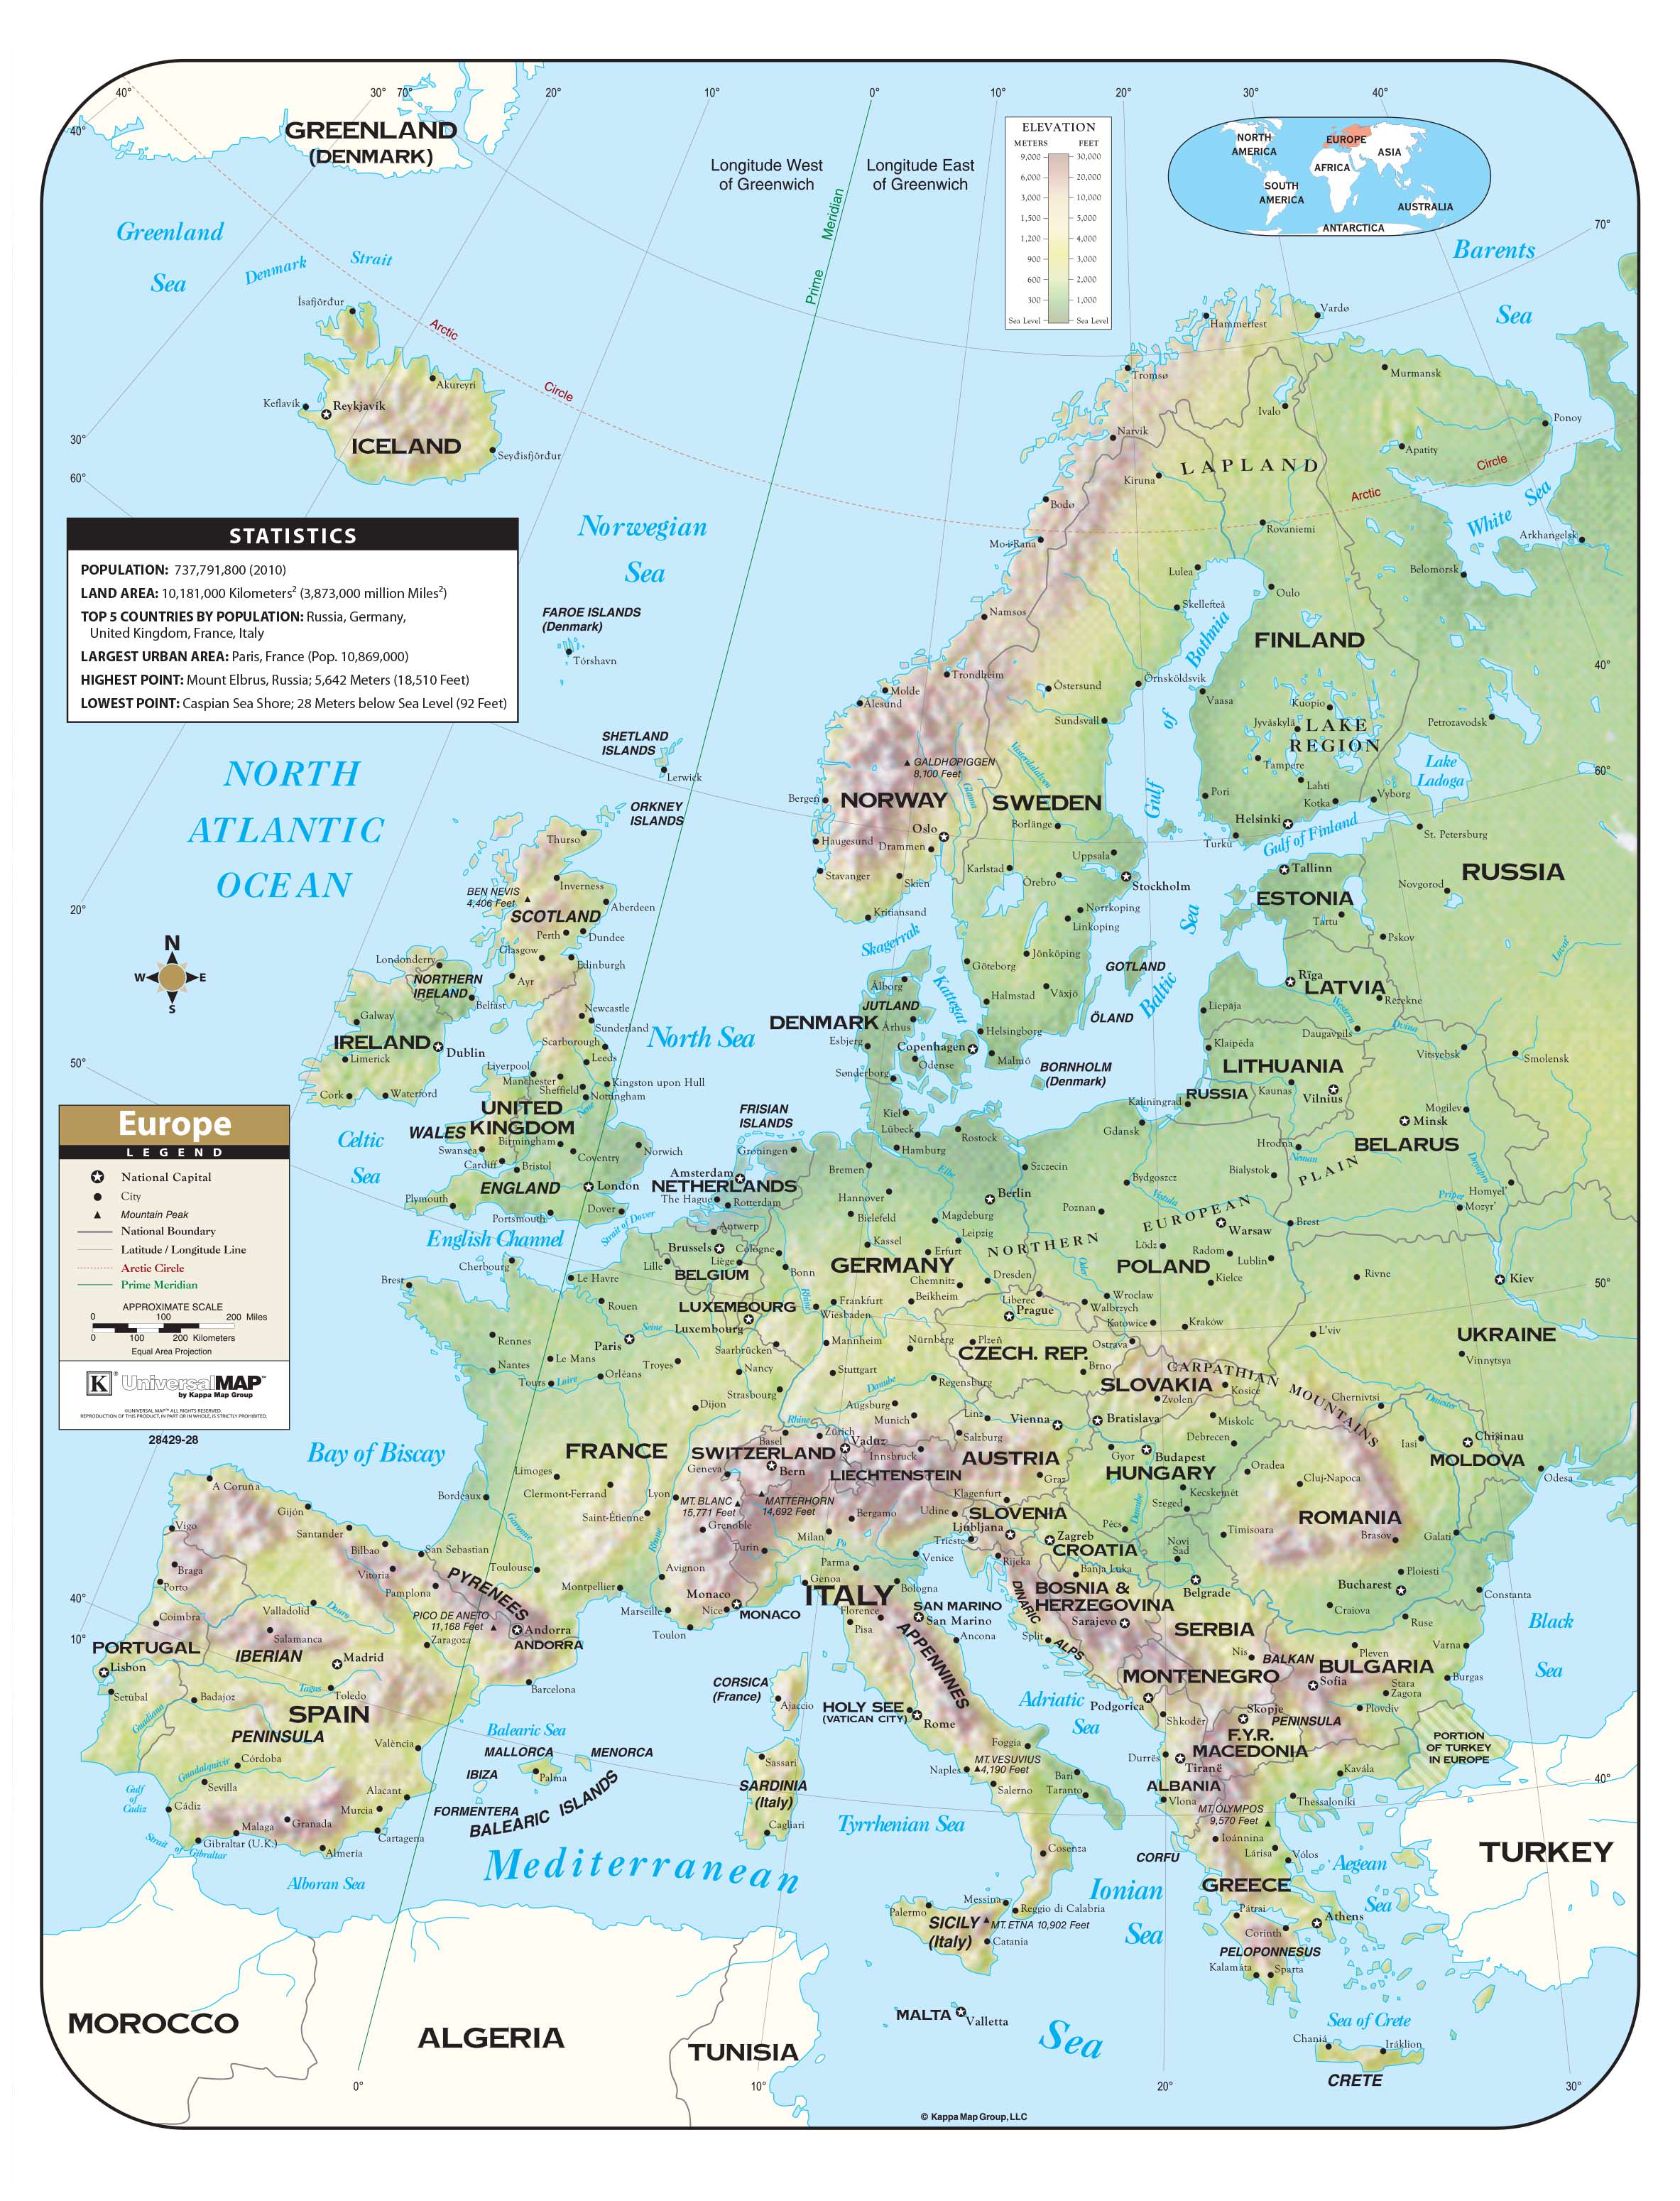 Physical Map Of Europe And Asia